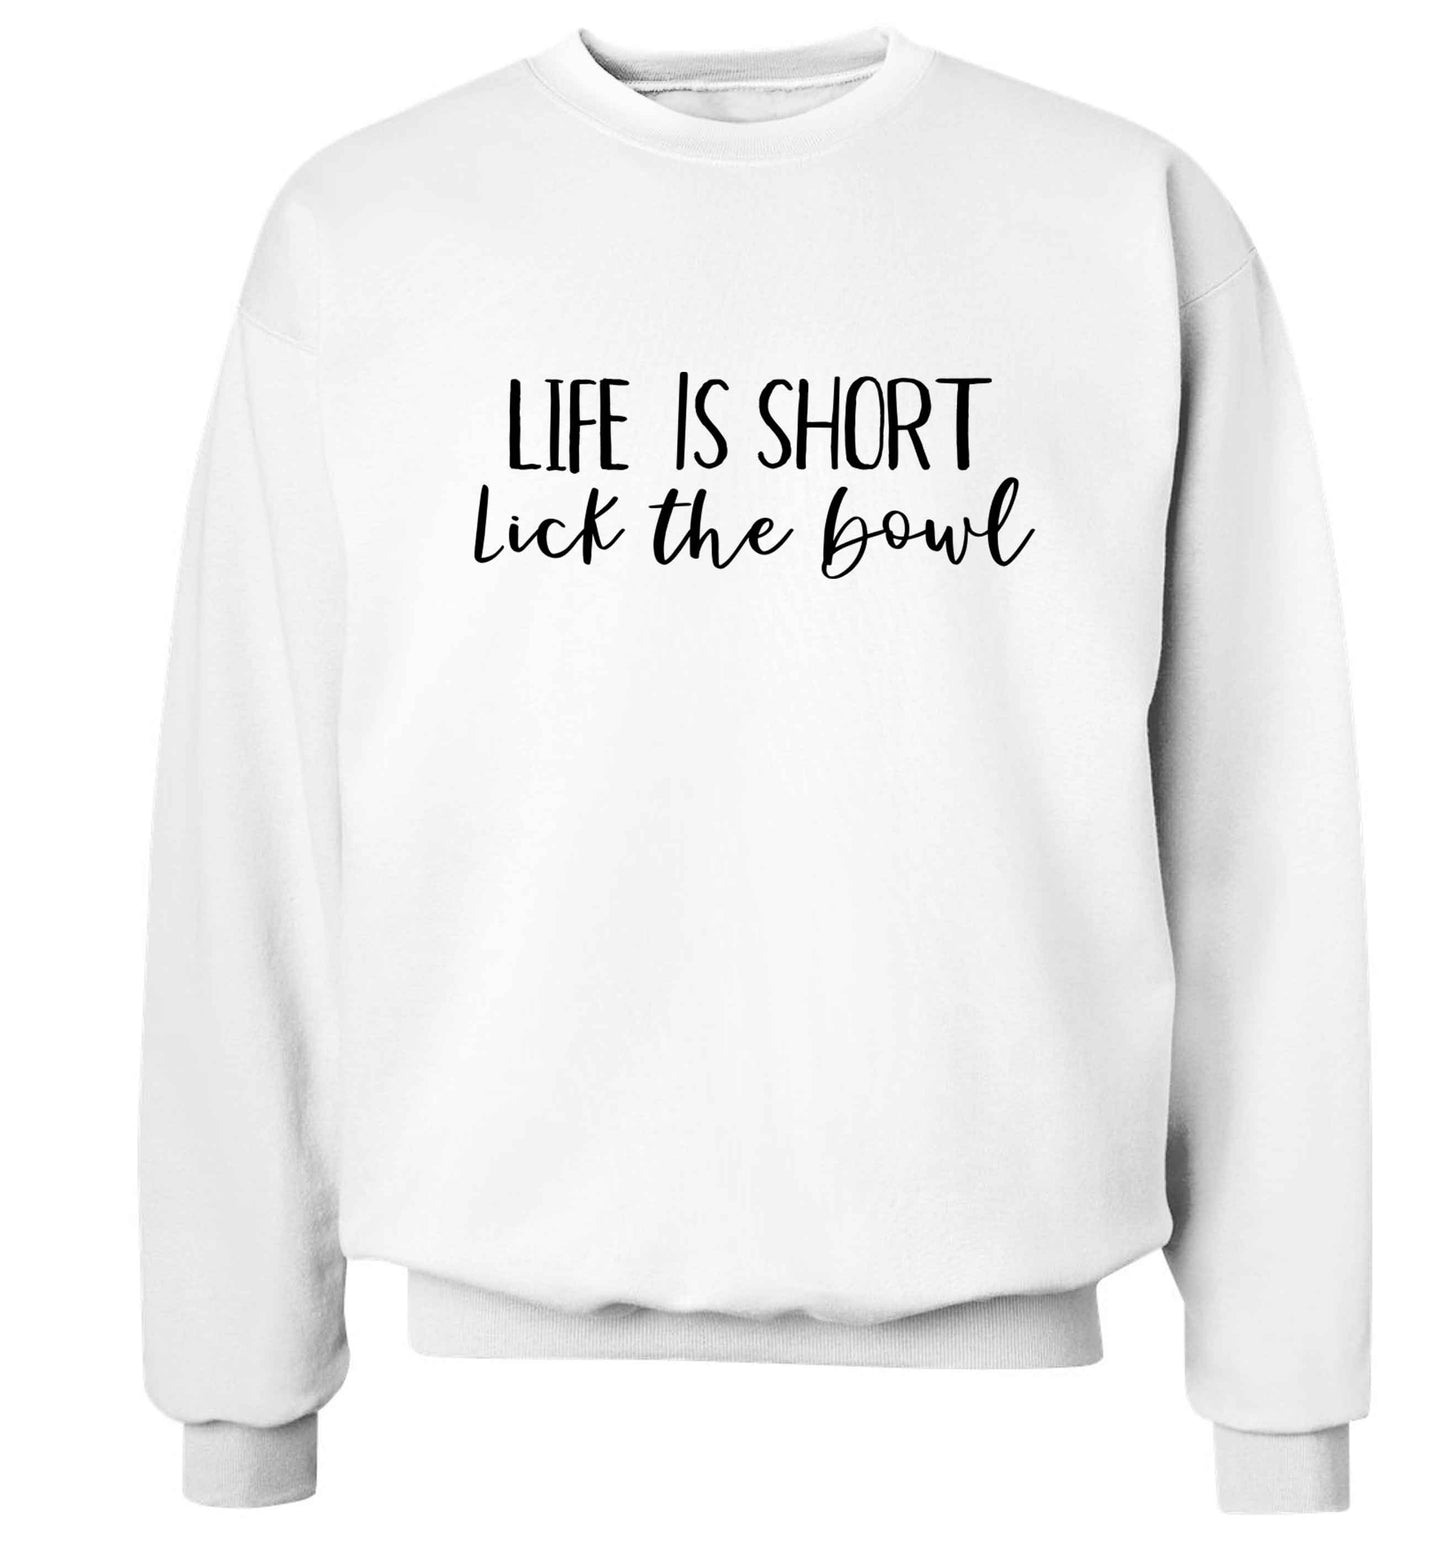 Life is short lick the bowl Adult's unisex white Sweater 2XL